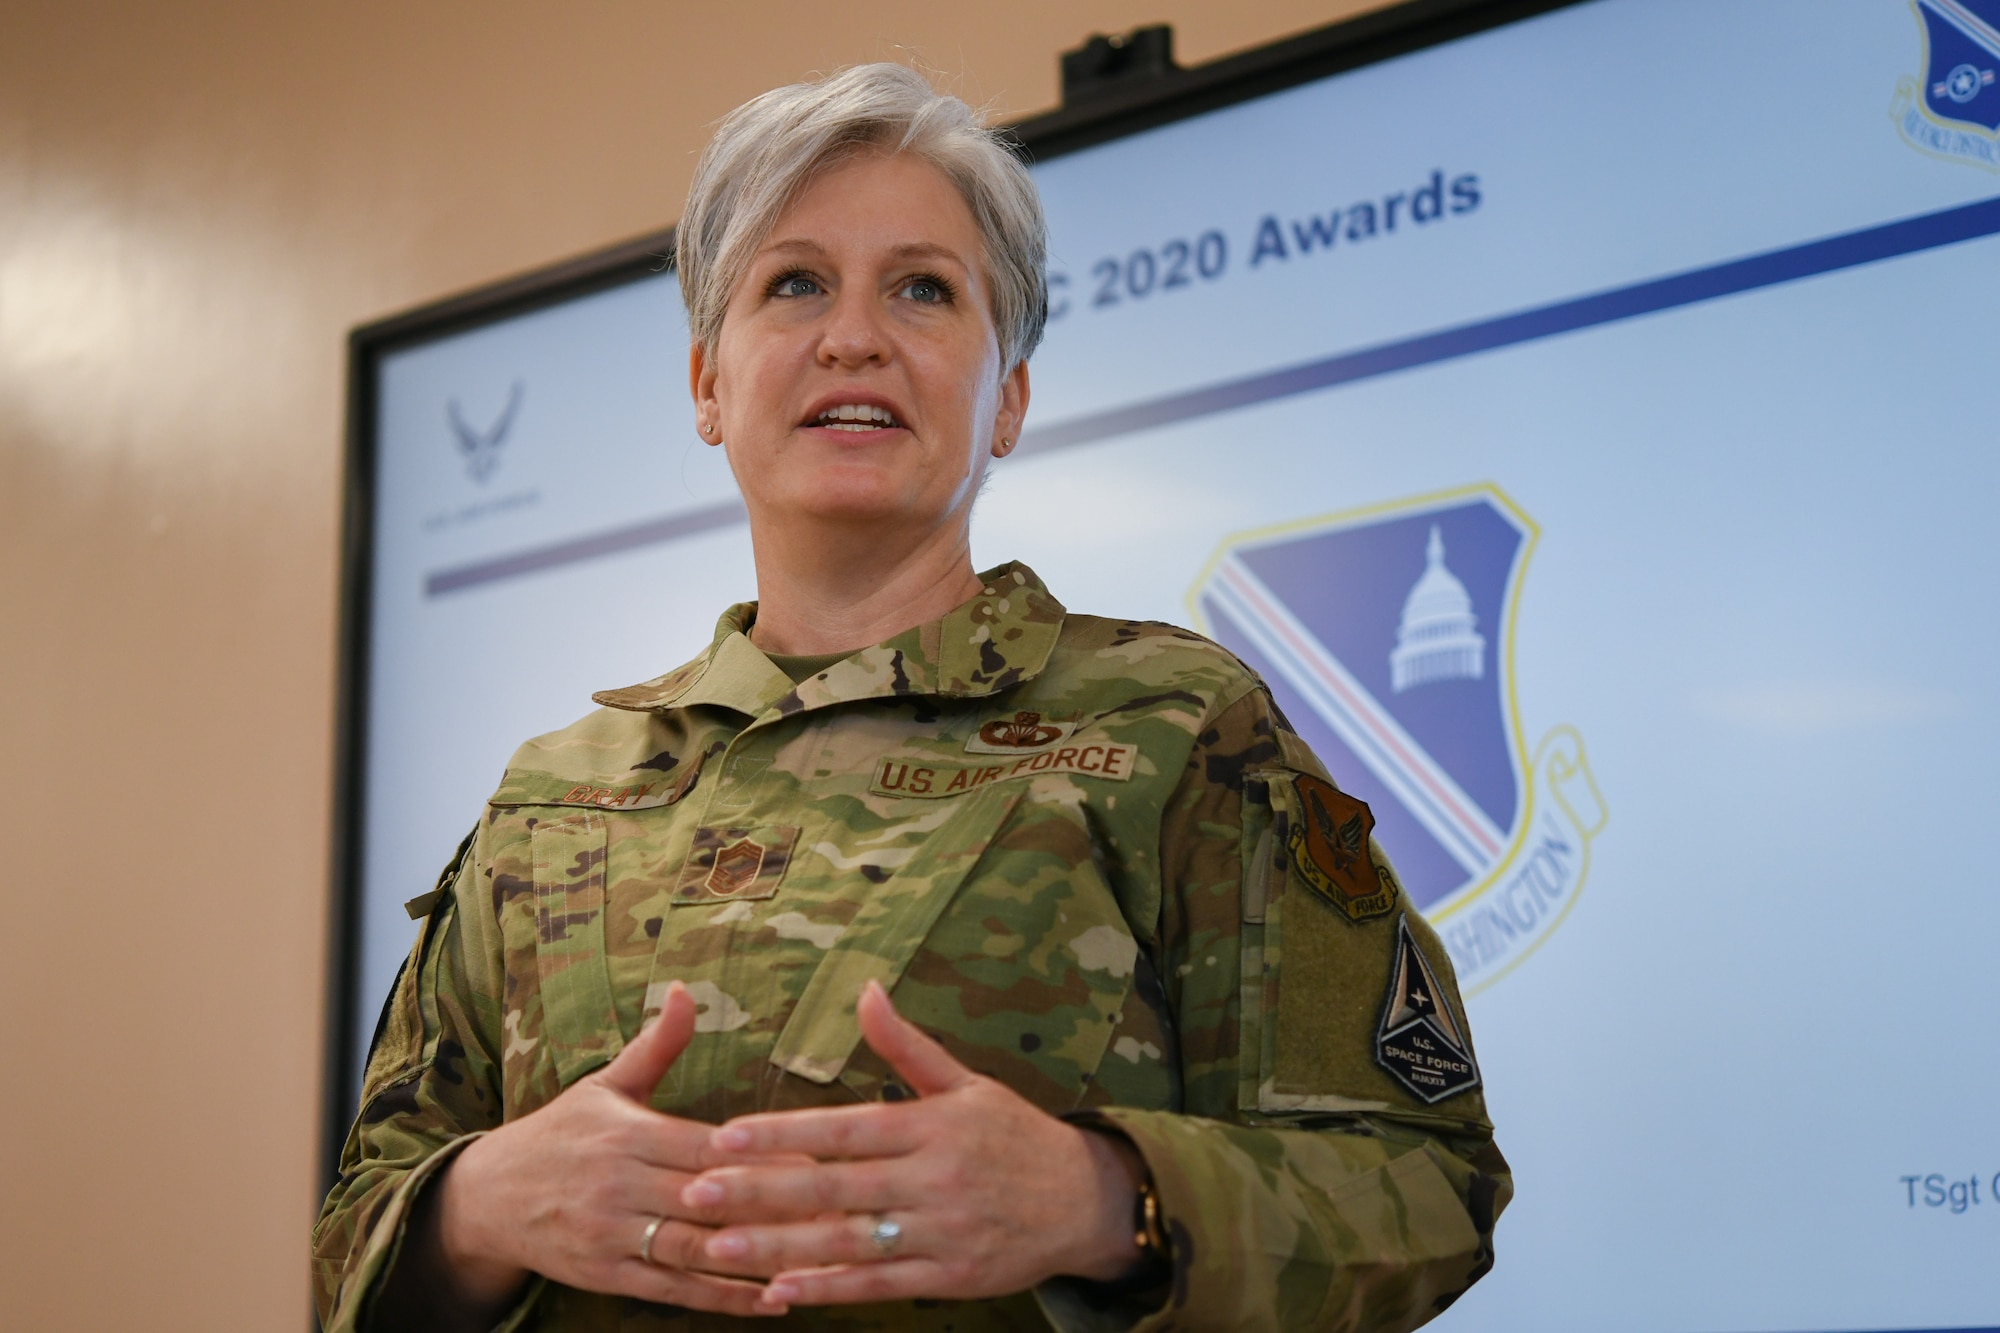 Chief Master Sgt. Natalie Gray, U.S. Air Force religious affairs senior enlisted advisor, briefs Chaplain Corps members in the National Capital Region about the importance of the Annual Awards Presentation at Chapel 1, Joint Base Andrews, Md., May 18, 2021. Gray and Maj. Gen. Steven A. Schaick, chief of chaplains, were featured guests at the ceremony. (U.S. Air Force photo by Airman 1st Class Bridgitte Taylor)